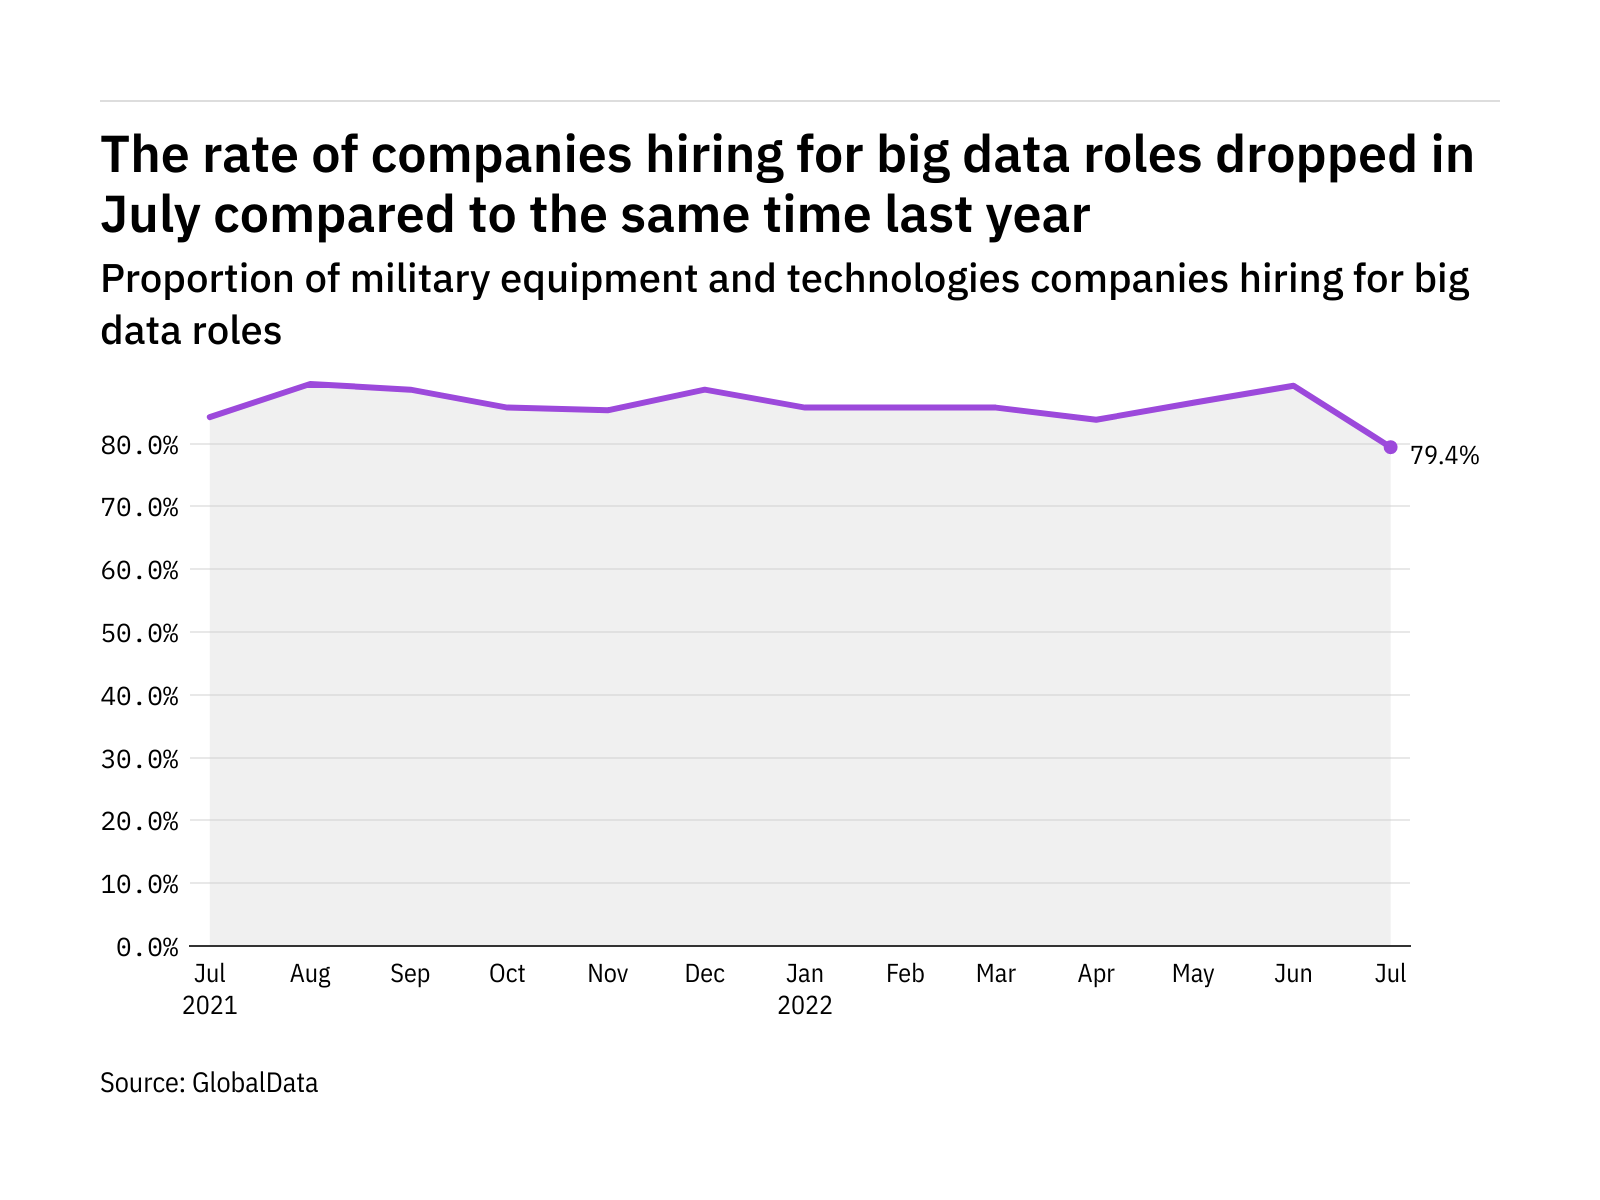 Big data hiring levels in the military industry fell to a year-low in July 2022